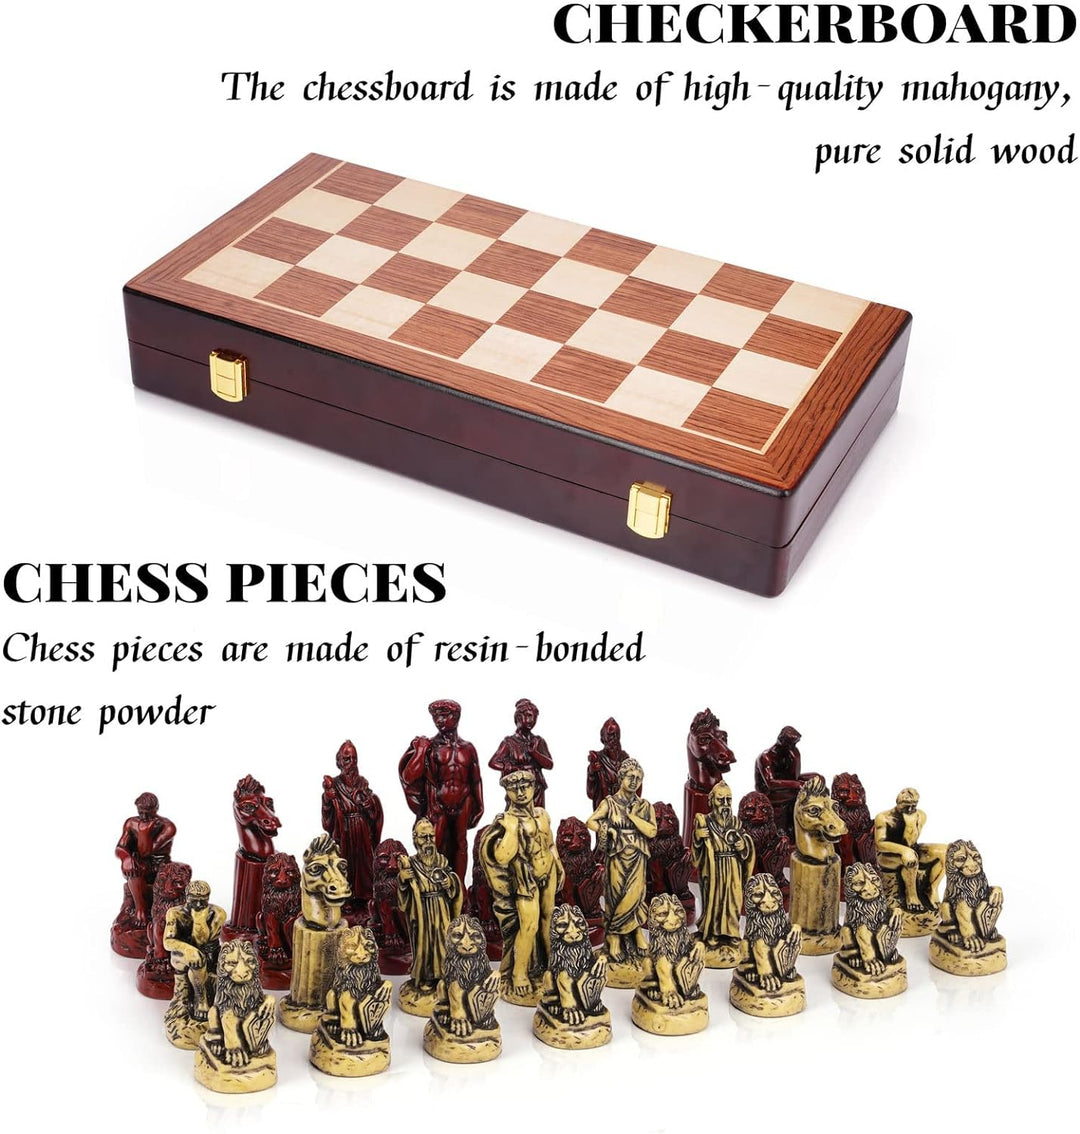 Retro Roman Chess Set with Resin Chess Pieces and Wooden Chessboard